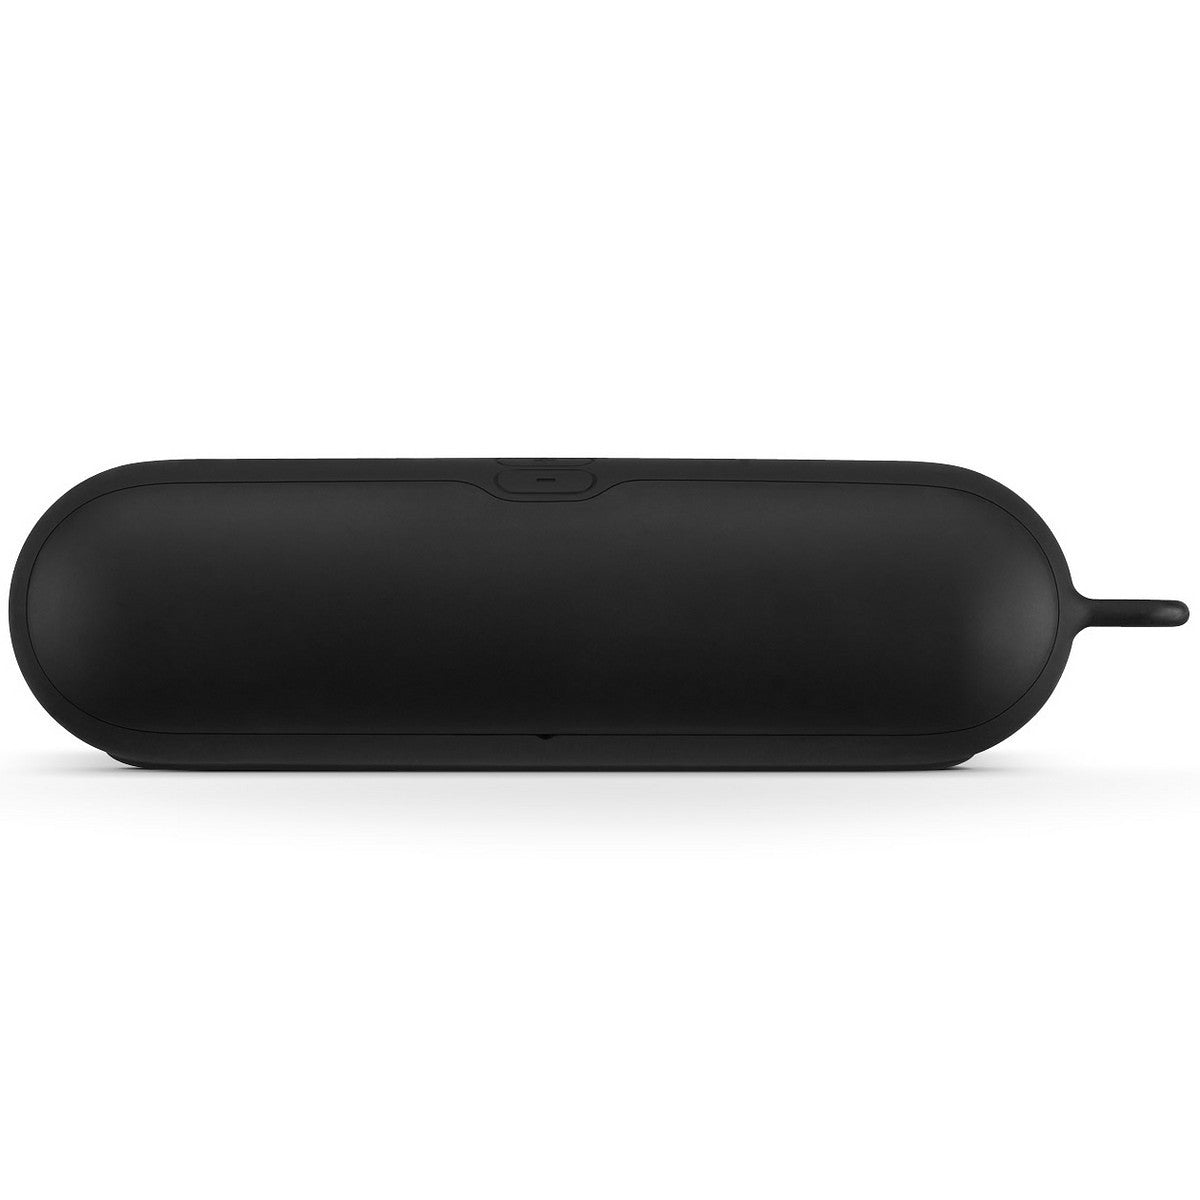 Beats by Dre Pill Sleeve Durable Layer Protection Sleeve for Beats Pill. Black (Used)